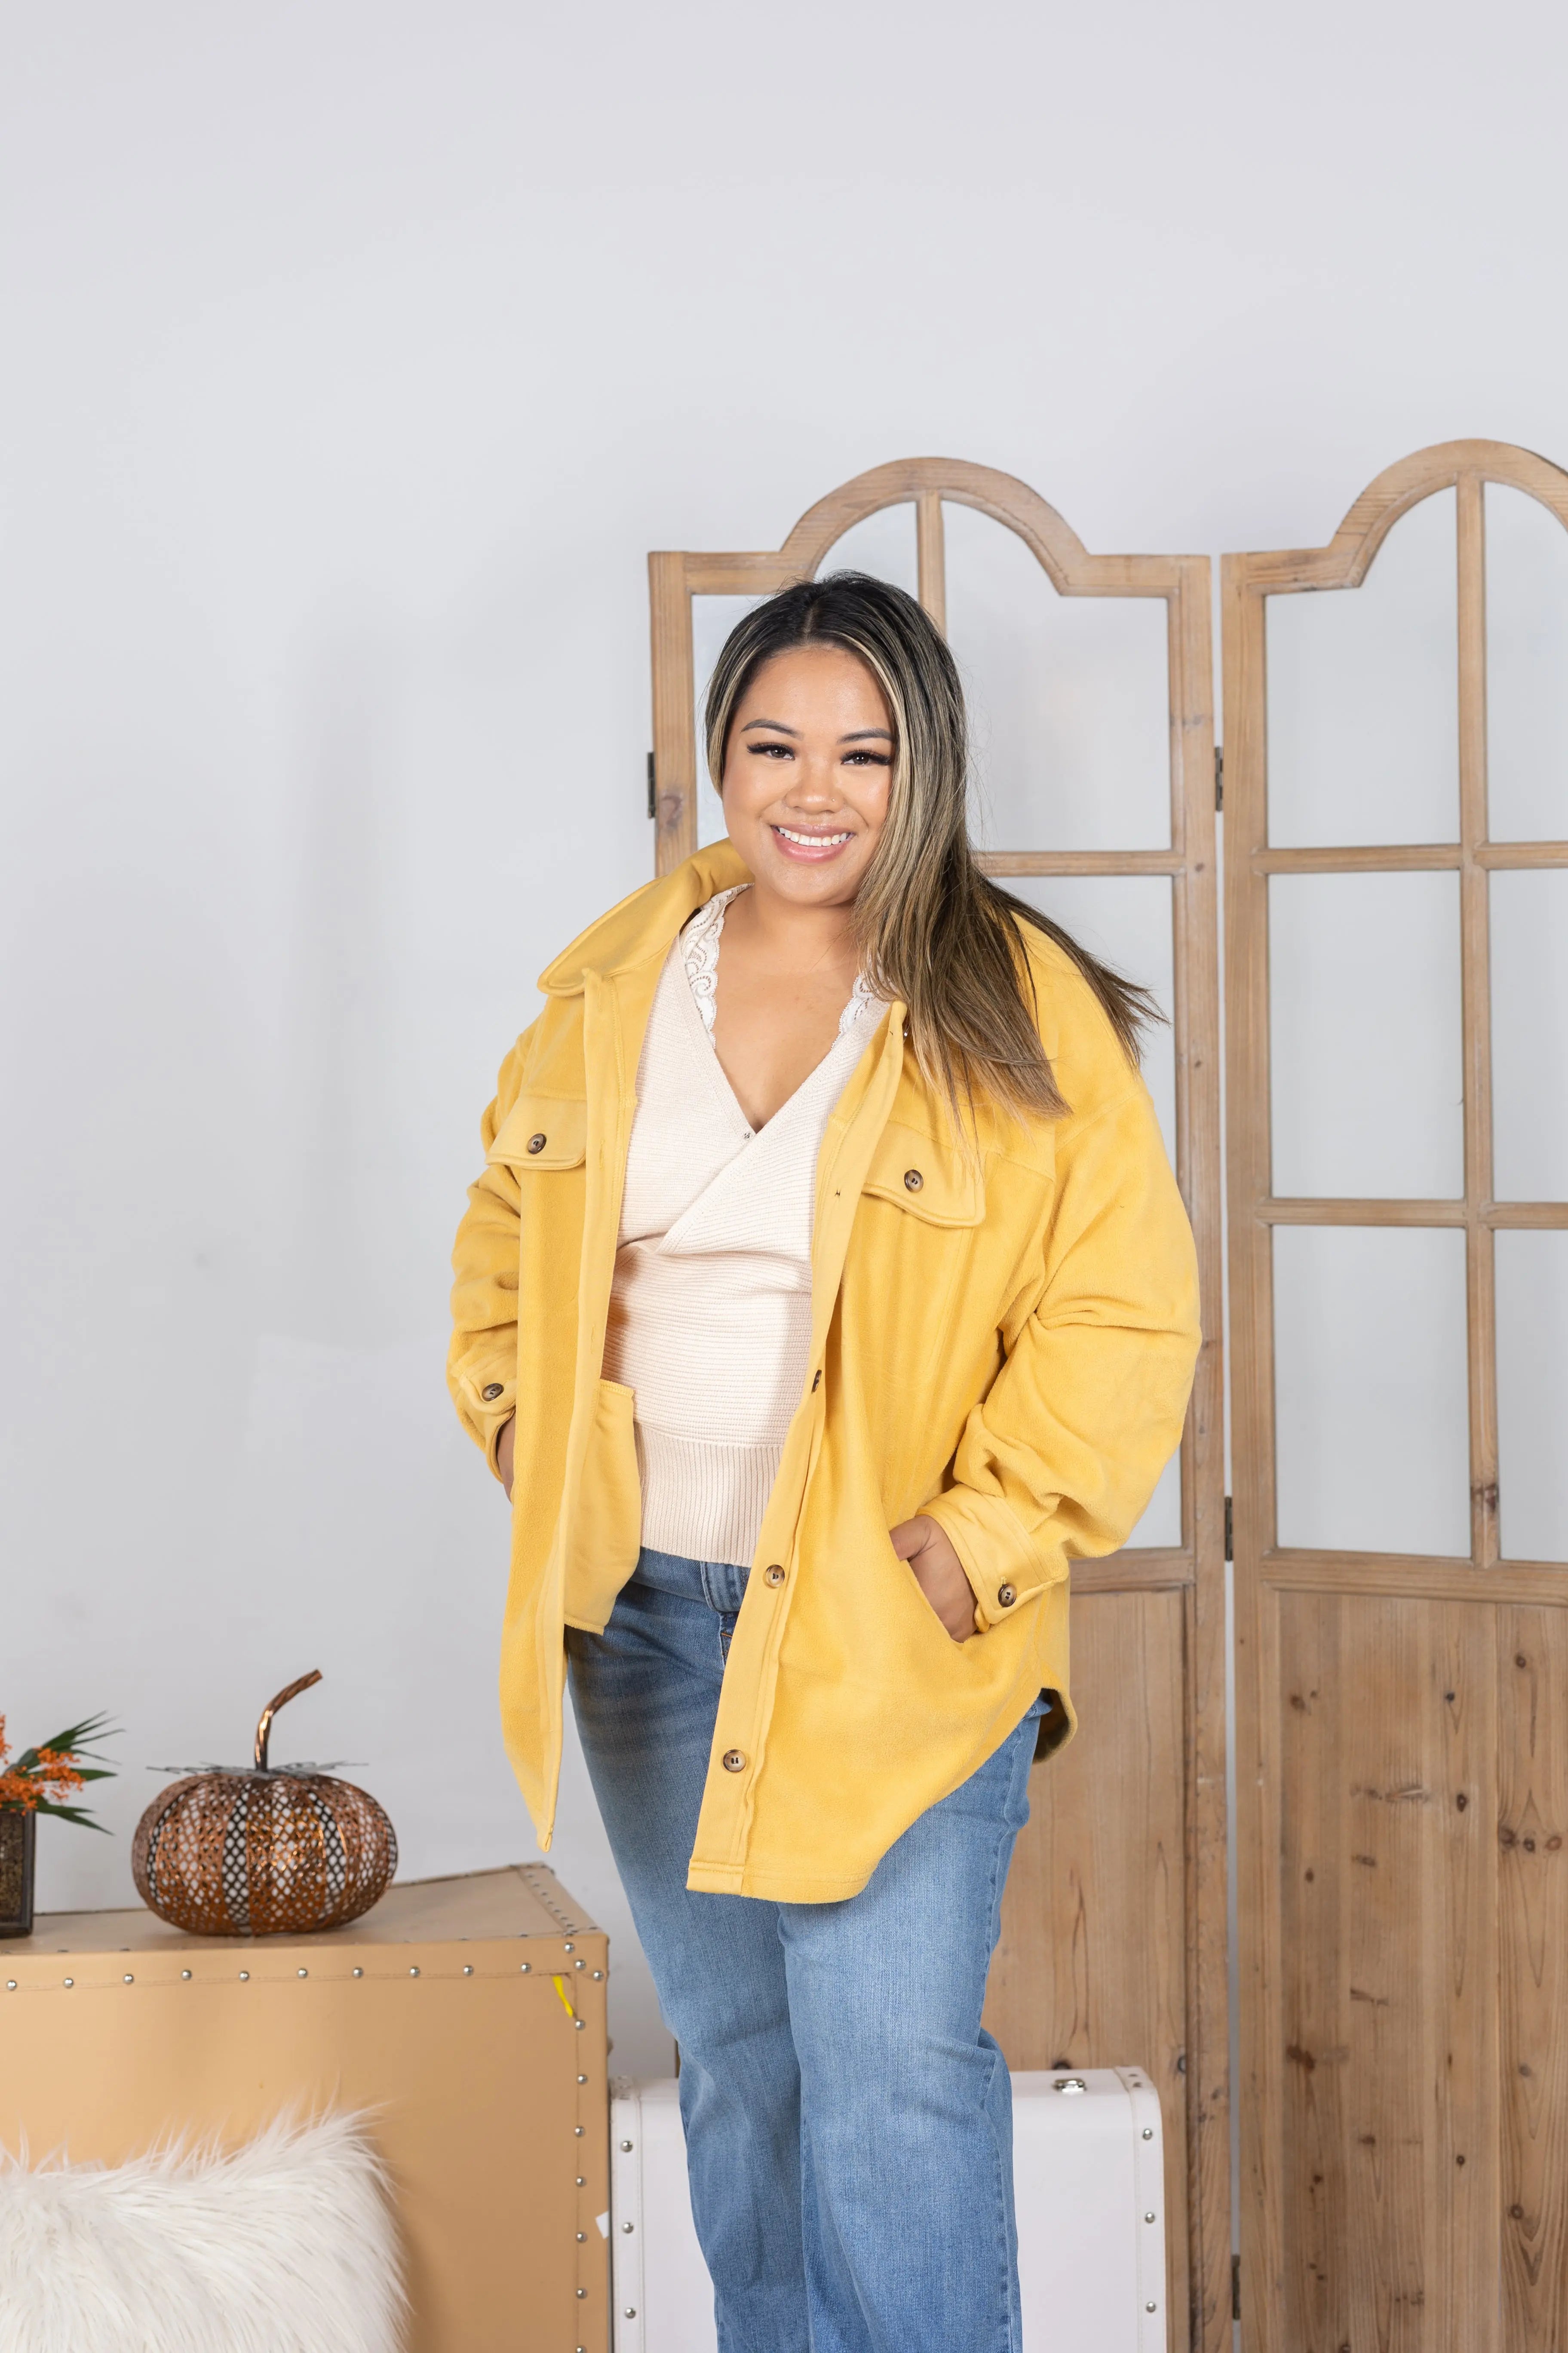 Baby It's Cold Outside - Mustard Shacket Boutique Simplified